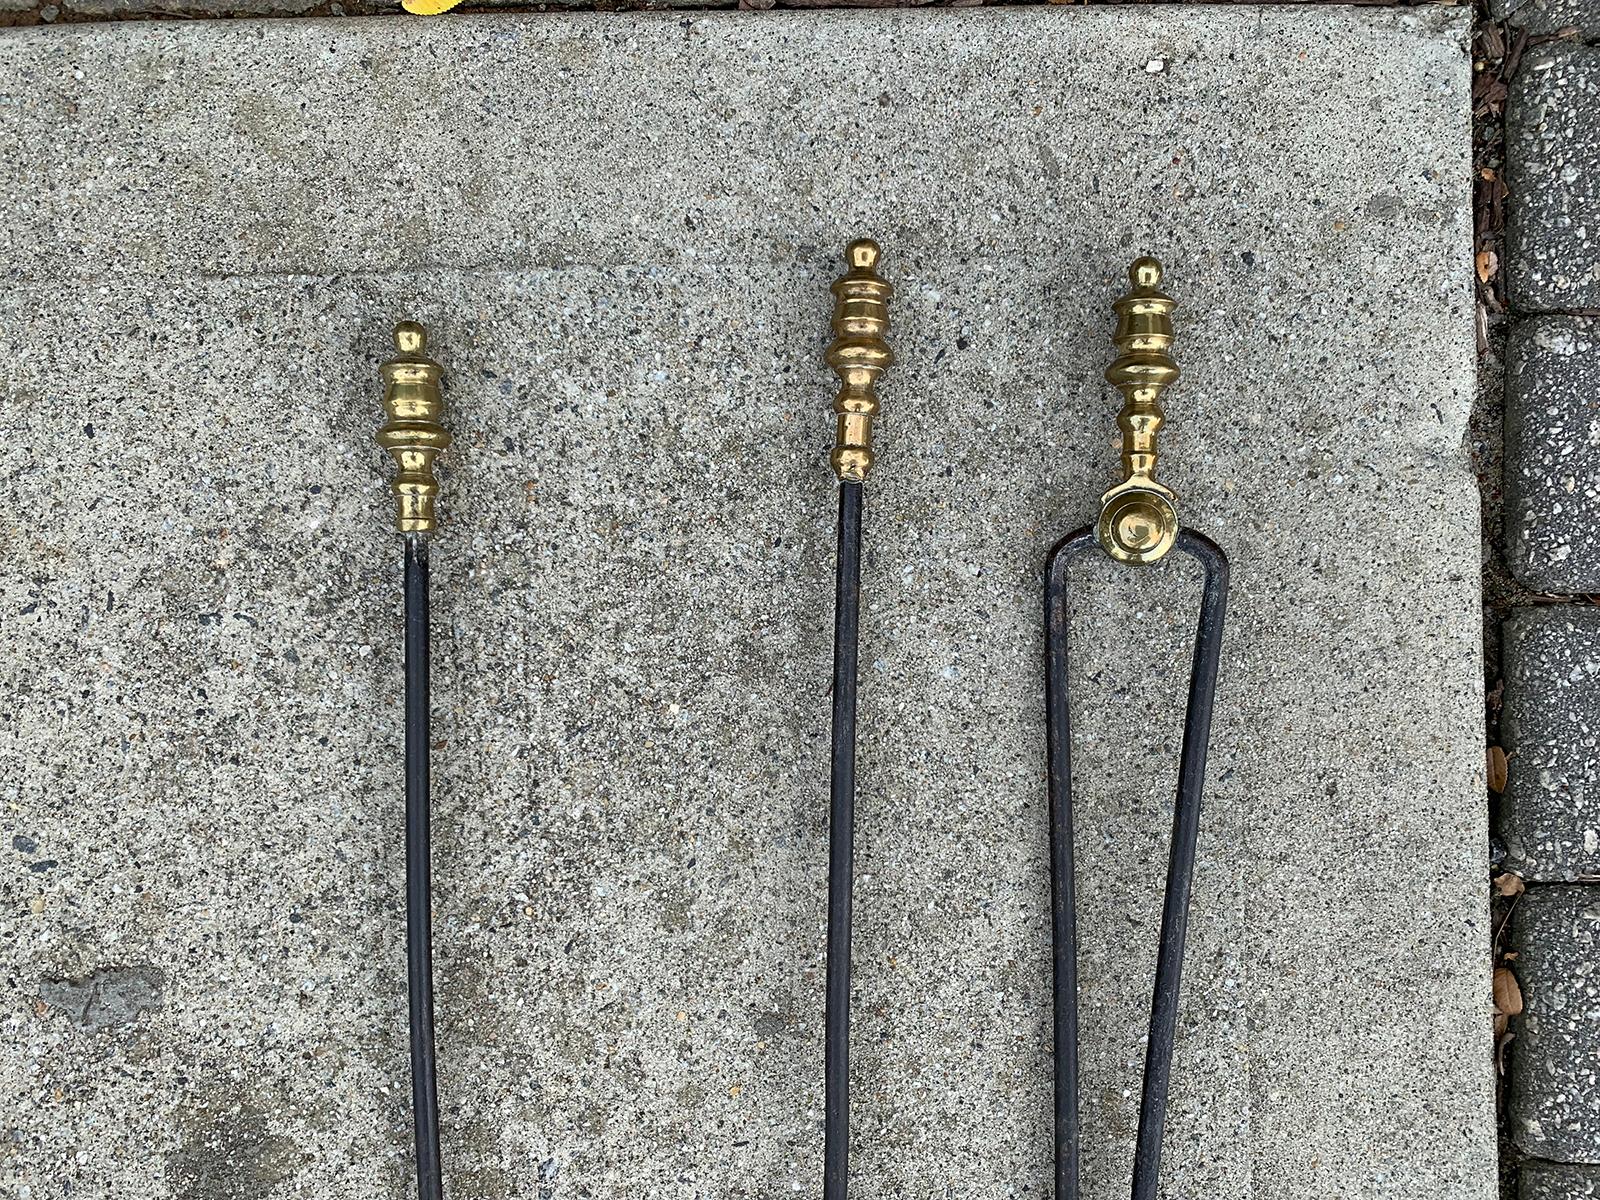 Set of three 19th century brass and steel fire tools
Measures: Poker: 18